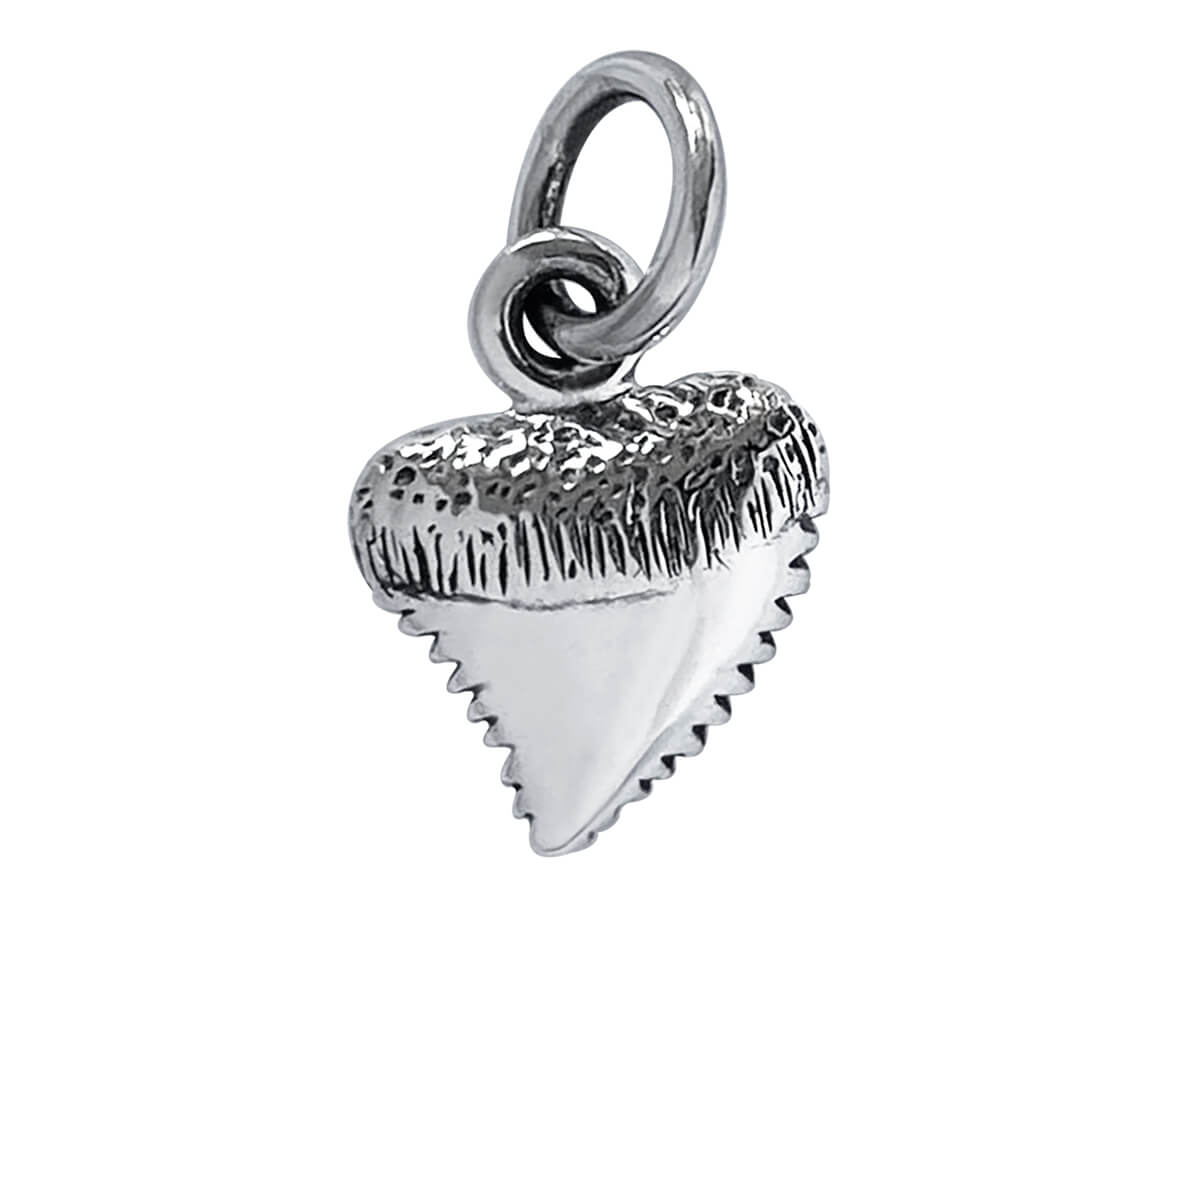 Shark tooth charm sterling silver small pendant